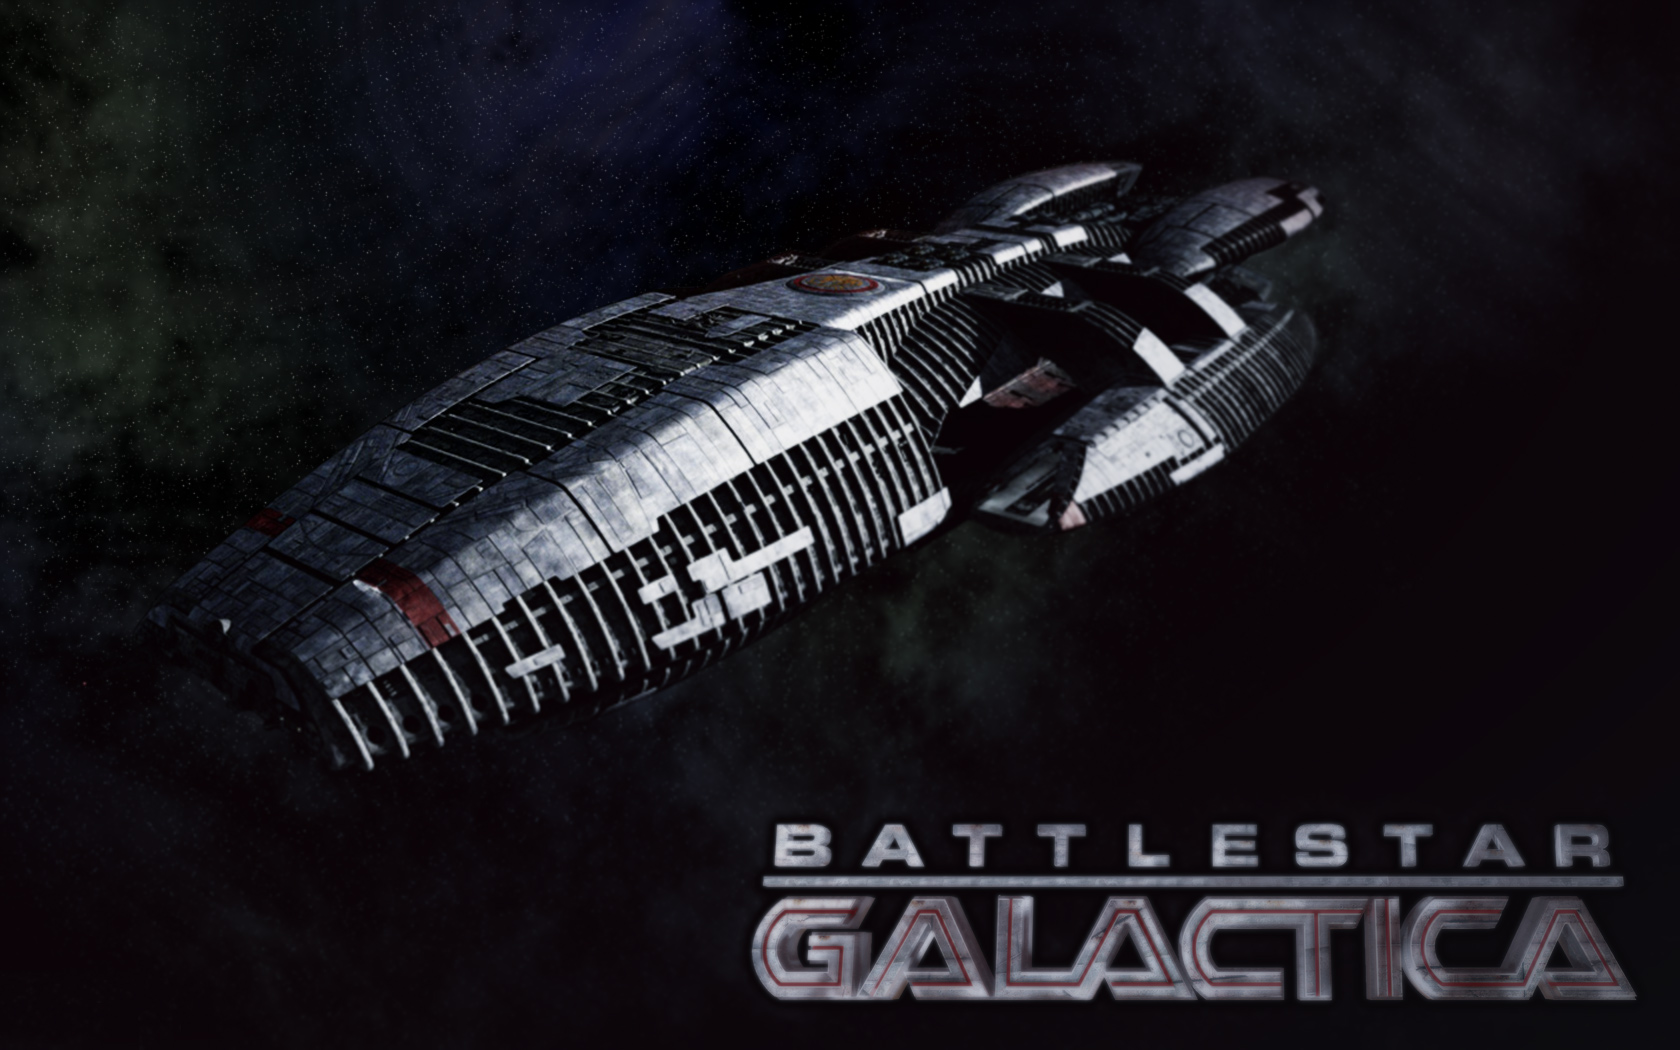 Galactica Science Fiction Spaceships Vehicles Wallpaper Hq